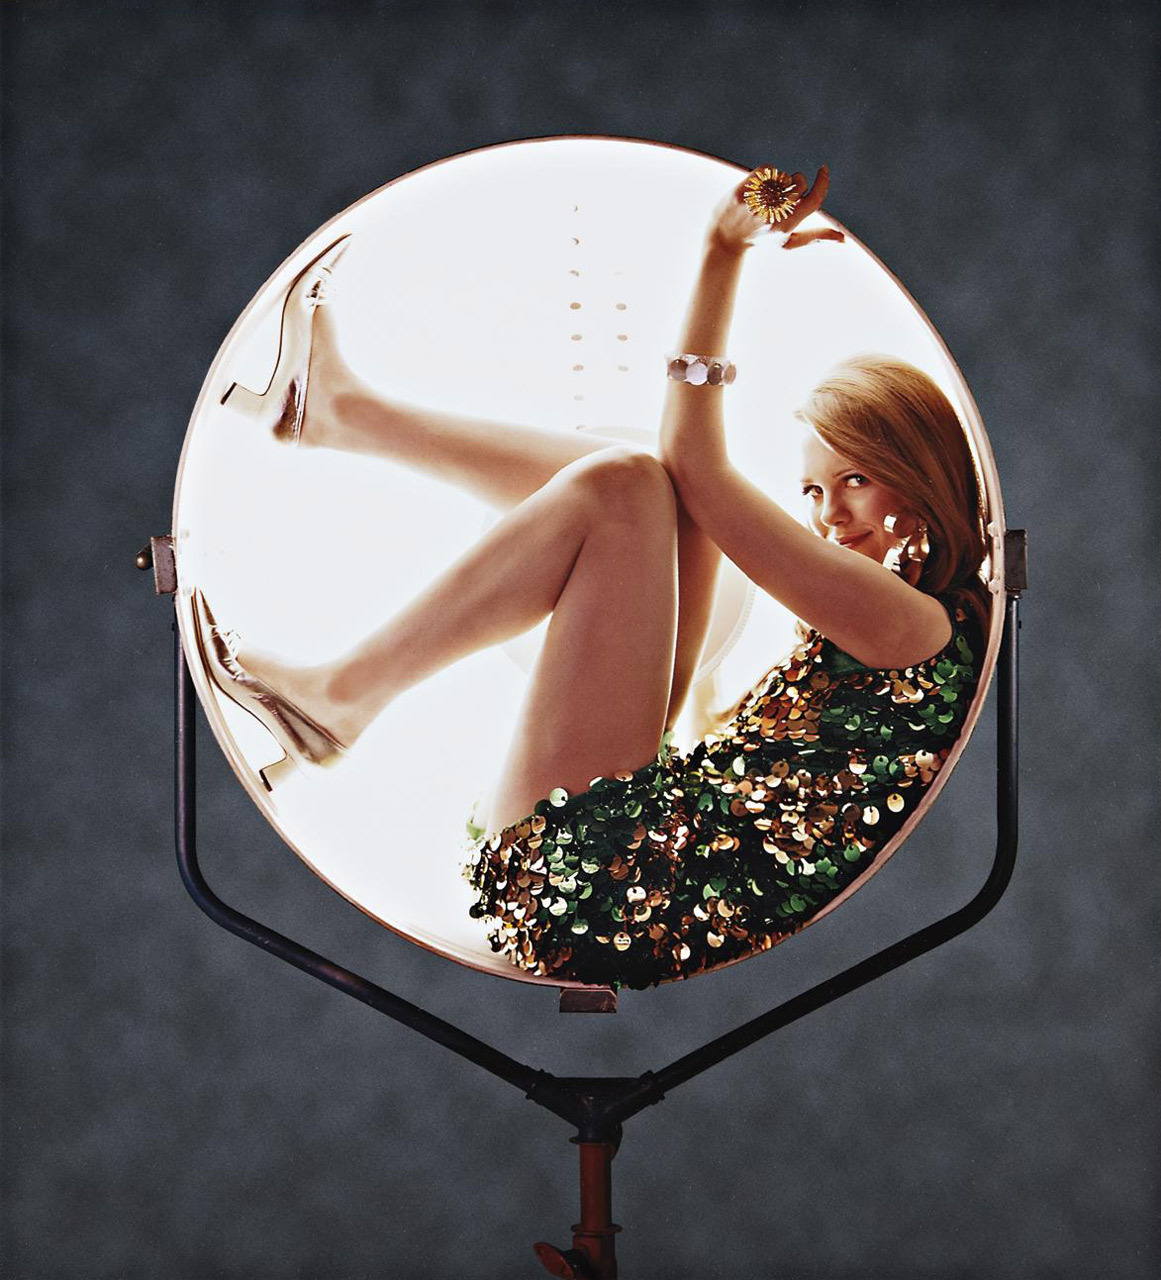 Girl in the Light photo by Ormond Gigli, NY 1967